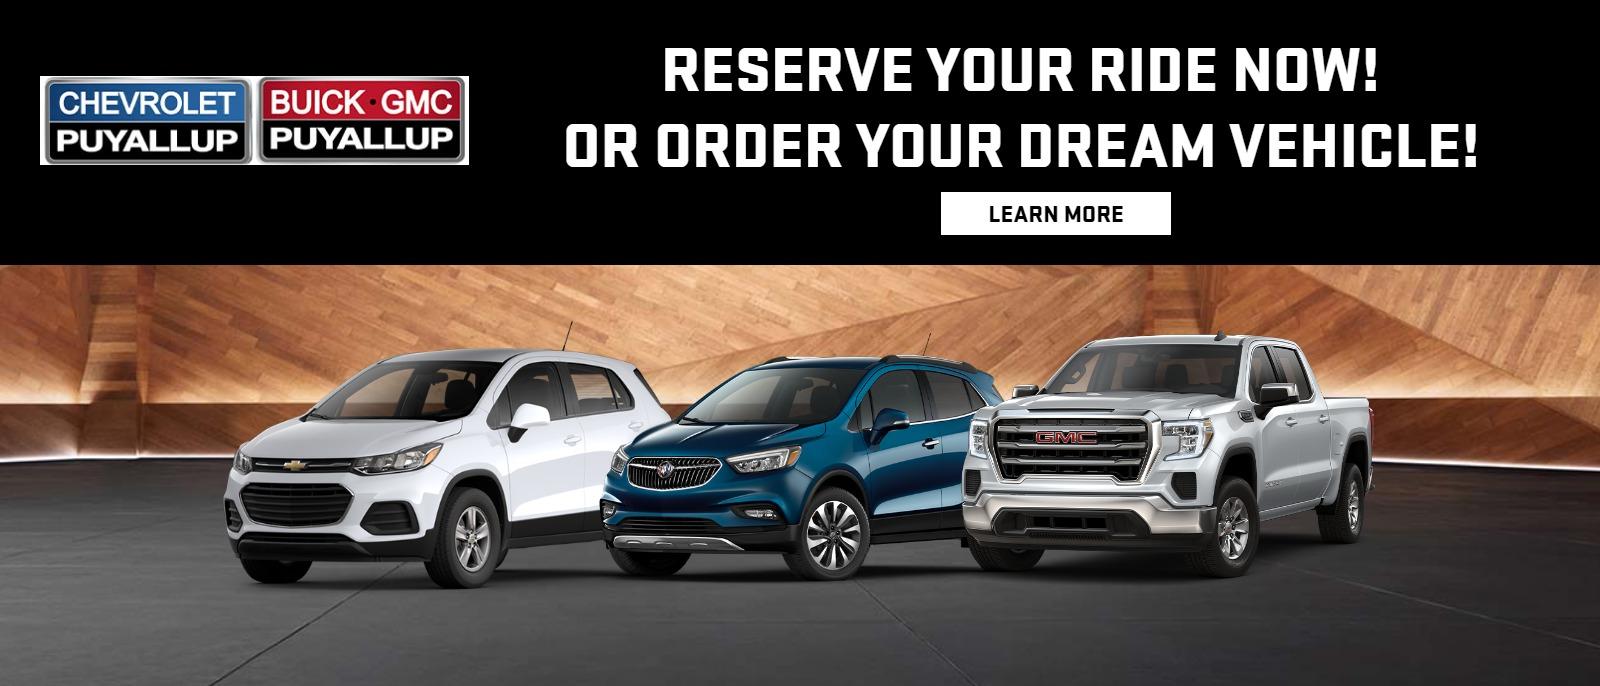 Reserve Your Ride NOW!
Or Order Your Dream Vehicle!